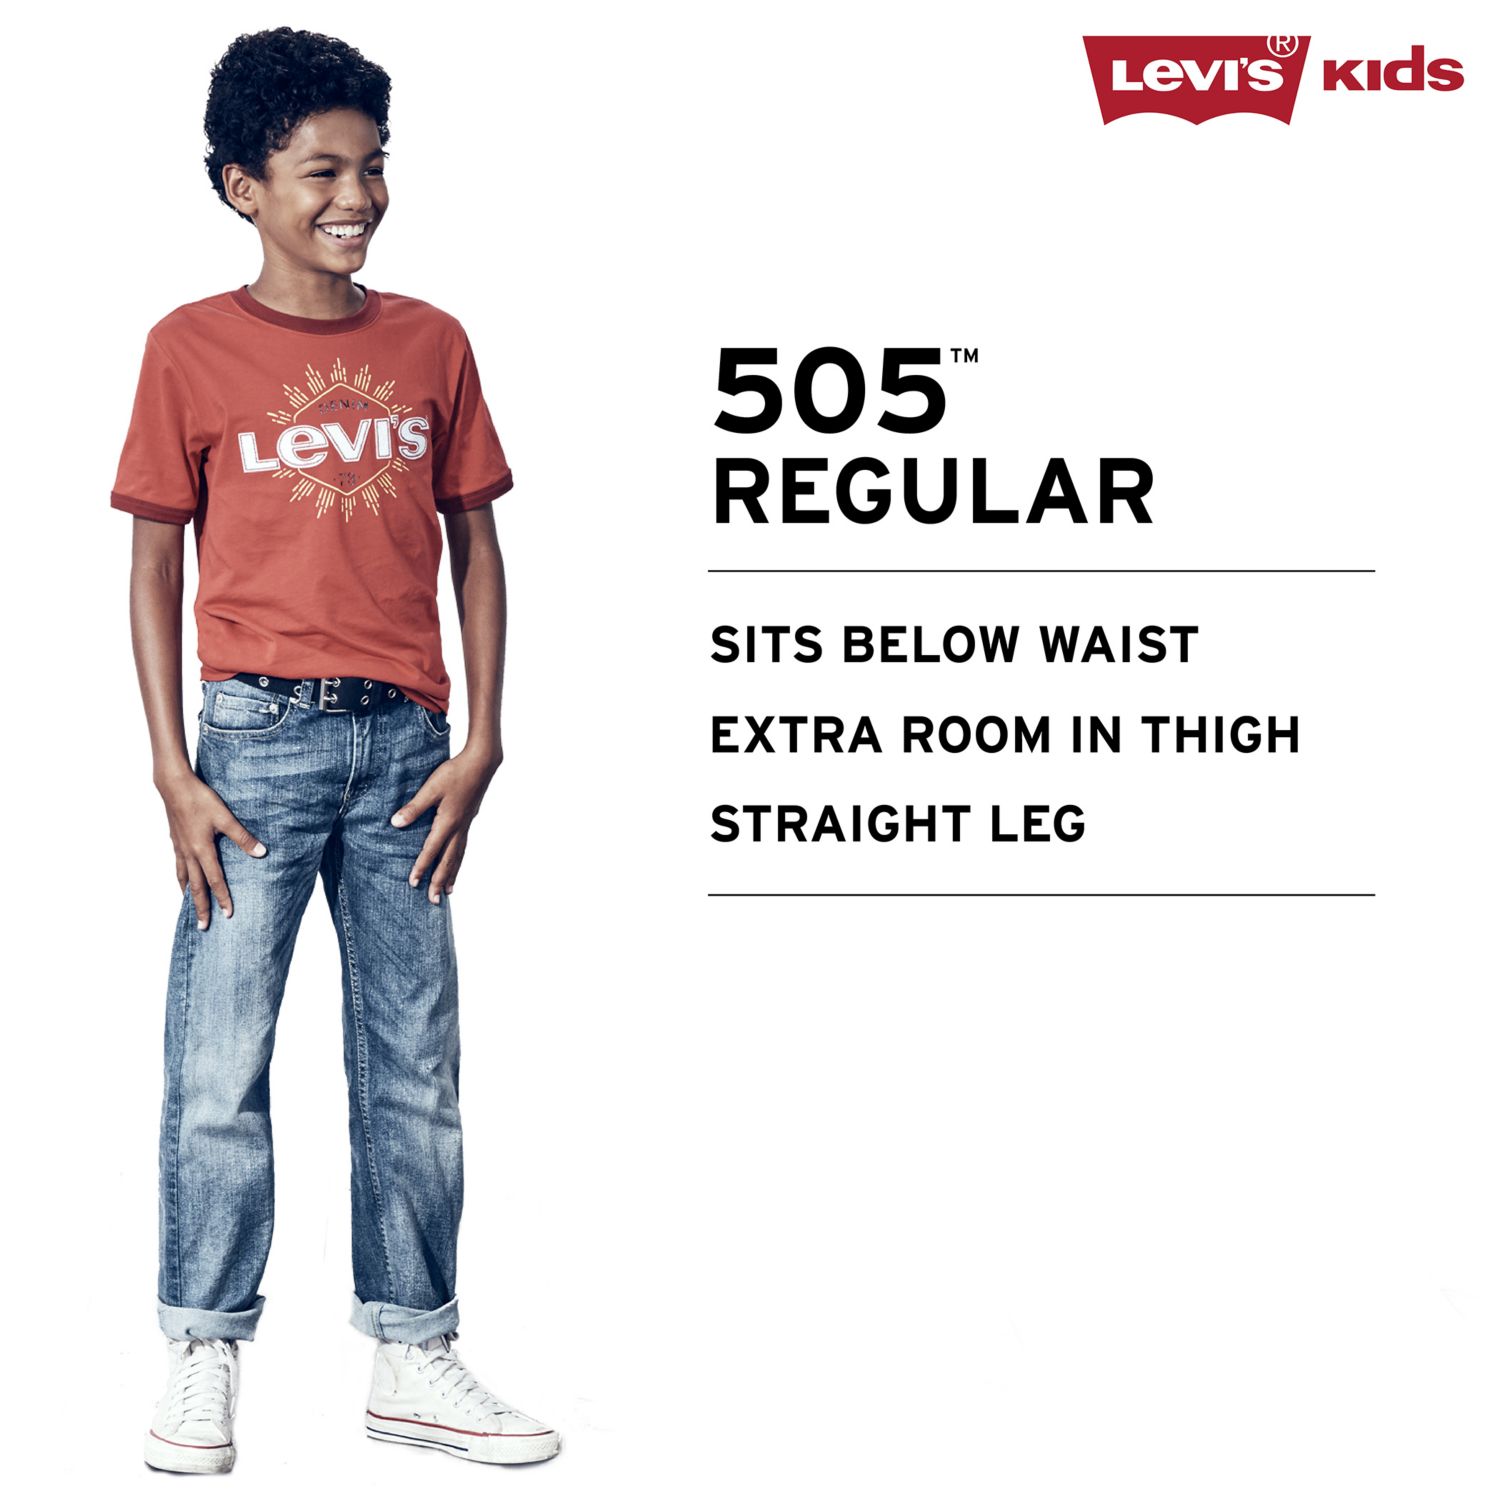 levis jeans 721 high rise skinny